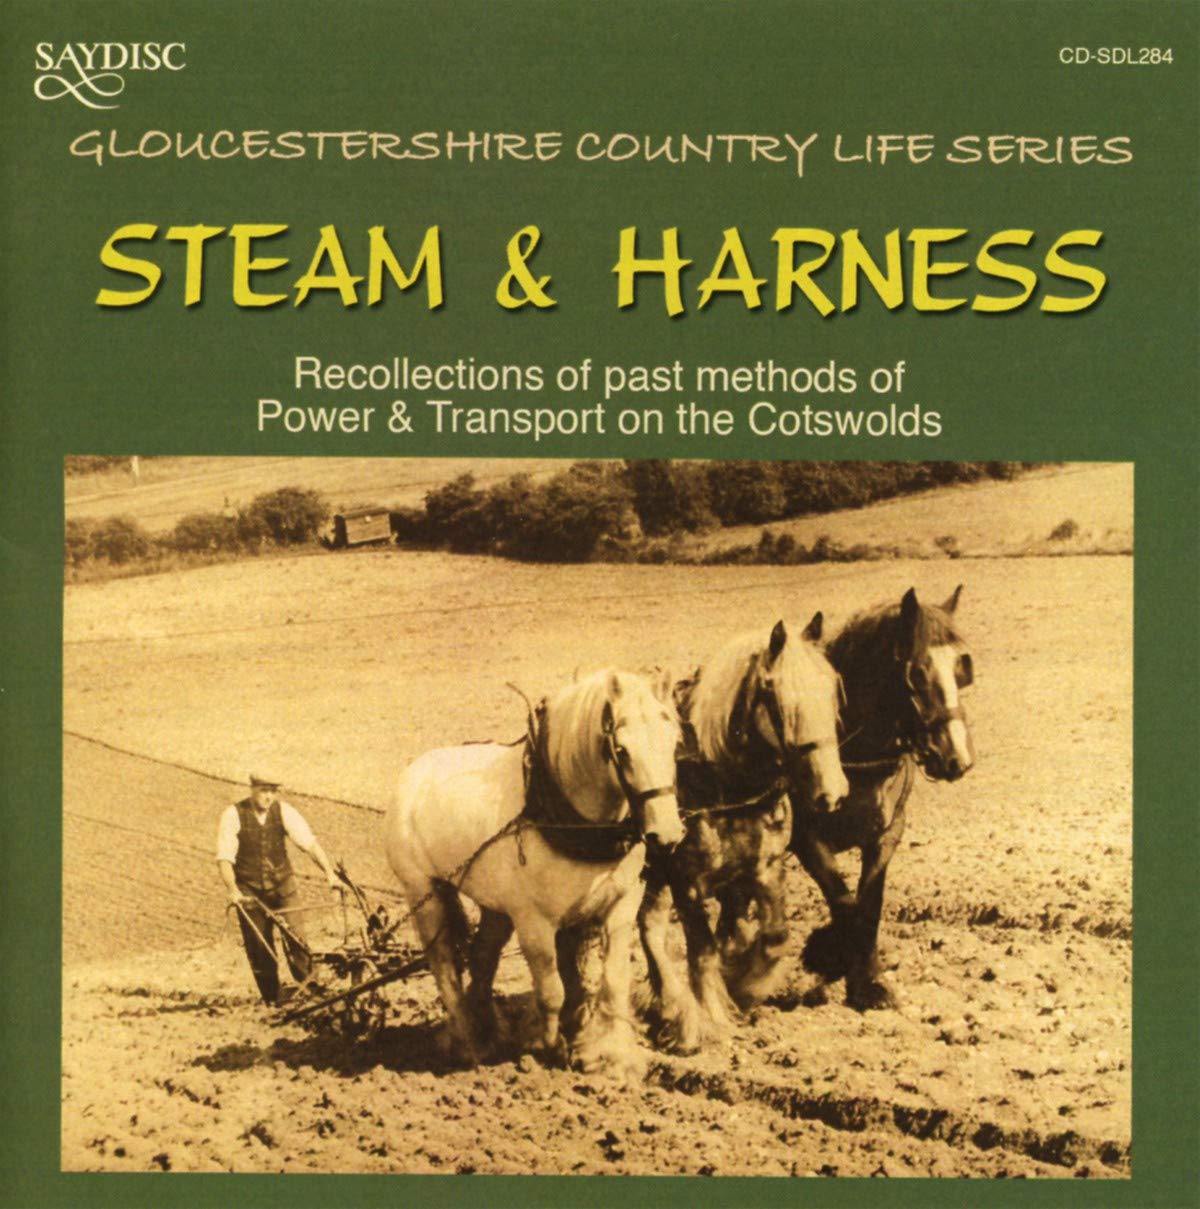 Steam and Harness: Recollections of past methods of Power & Transport on the Cotswolds